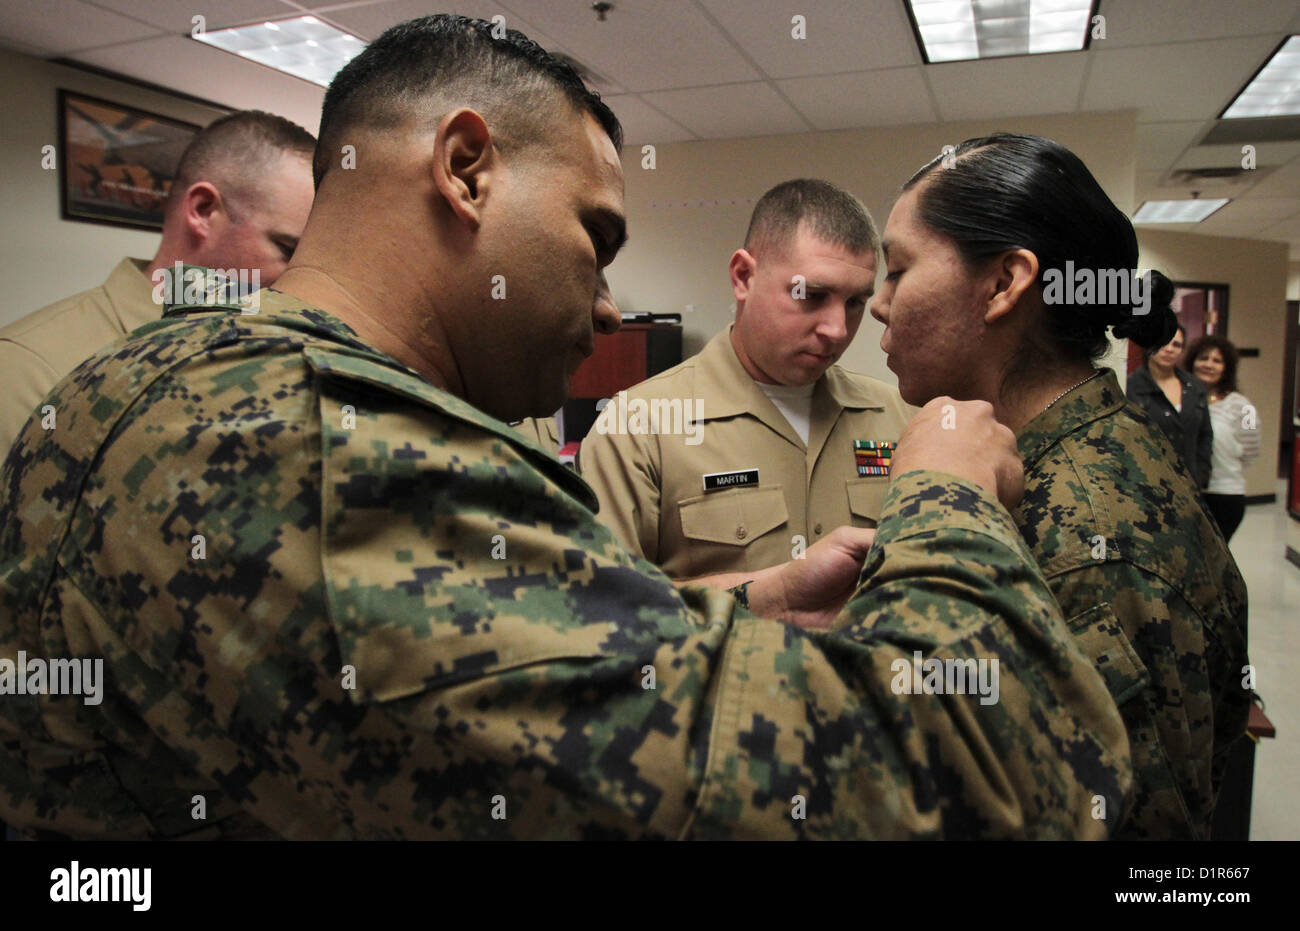 Lance Cpl. Reba K. James, receives new lance corporal chevrons on her collar upon being promoted from private first class to lance corporal during a ceremony at the Marine Corps Recruiting Station Phoenix Headquarters in Phoenix, Jan. 2, 2013. James, a native of Pinon, Ariz., enlisted into the Marine Corps in May of 2012 and is in the Phoenix region temporarily assisting recruiters before she returns to her Marine occupational specialty training at the Defense Information School at Fort George G. Meade, Md. James is training to become a combat correspondent. 'I remember her being in the delaye Stock Photo